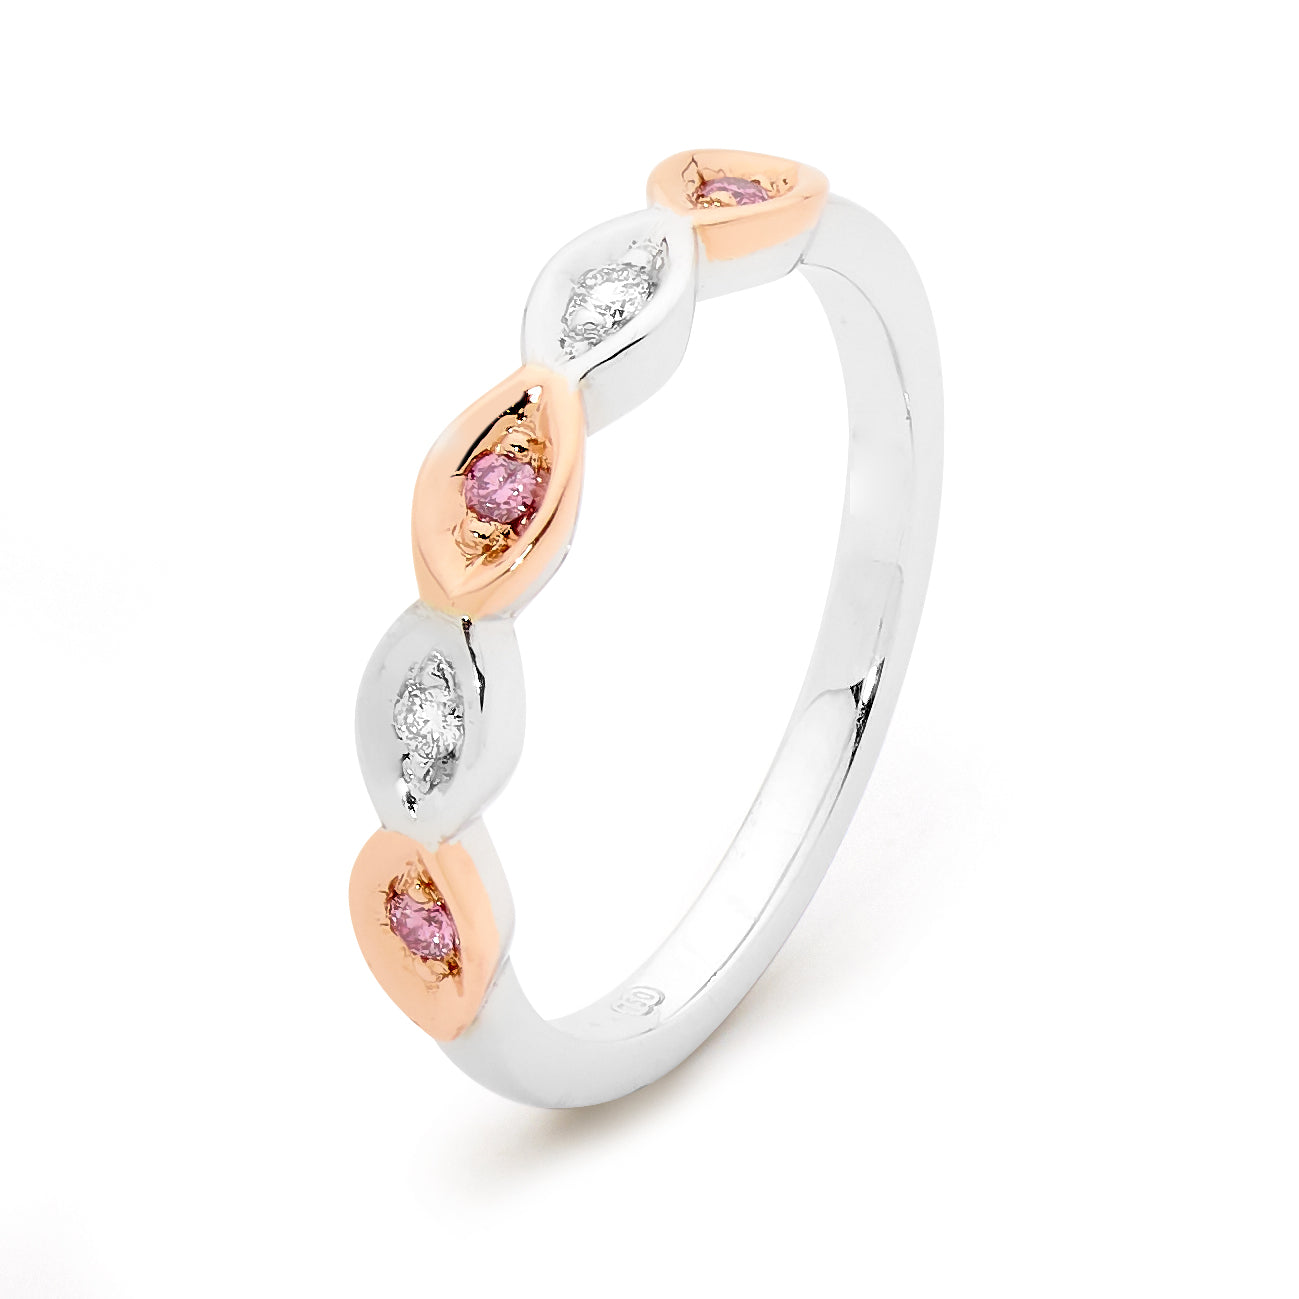 Ellendale 18Ct White Gold And Rose Gold Argyle White And Pink Champagne Diamond Wedding Band